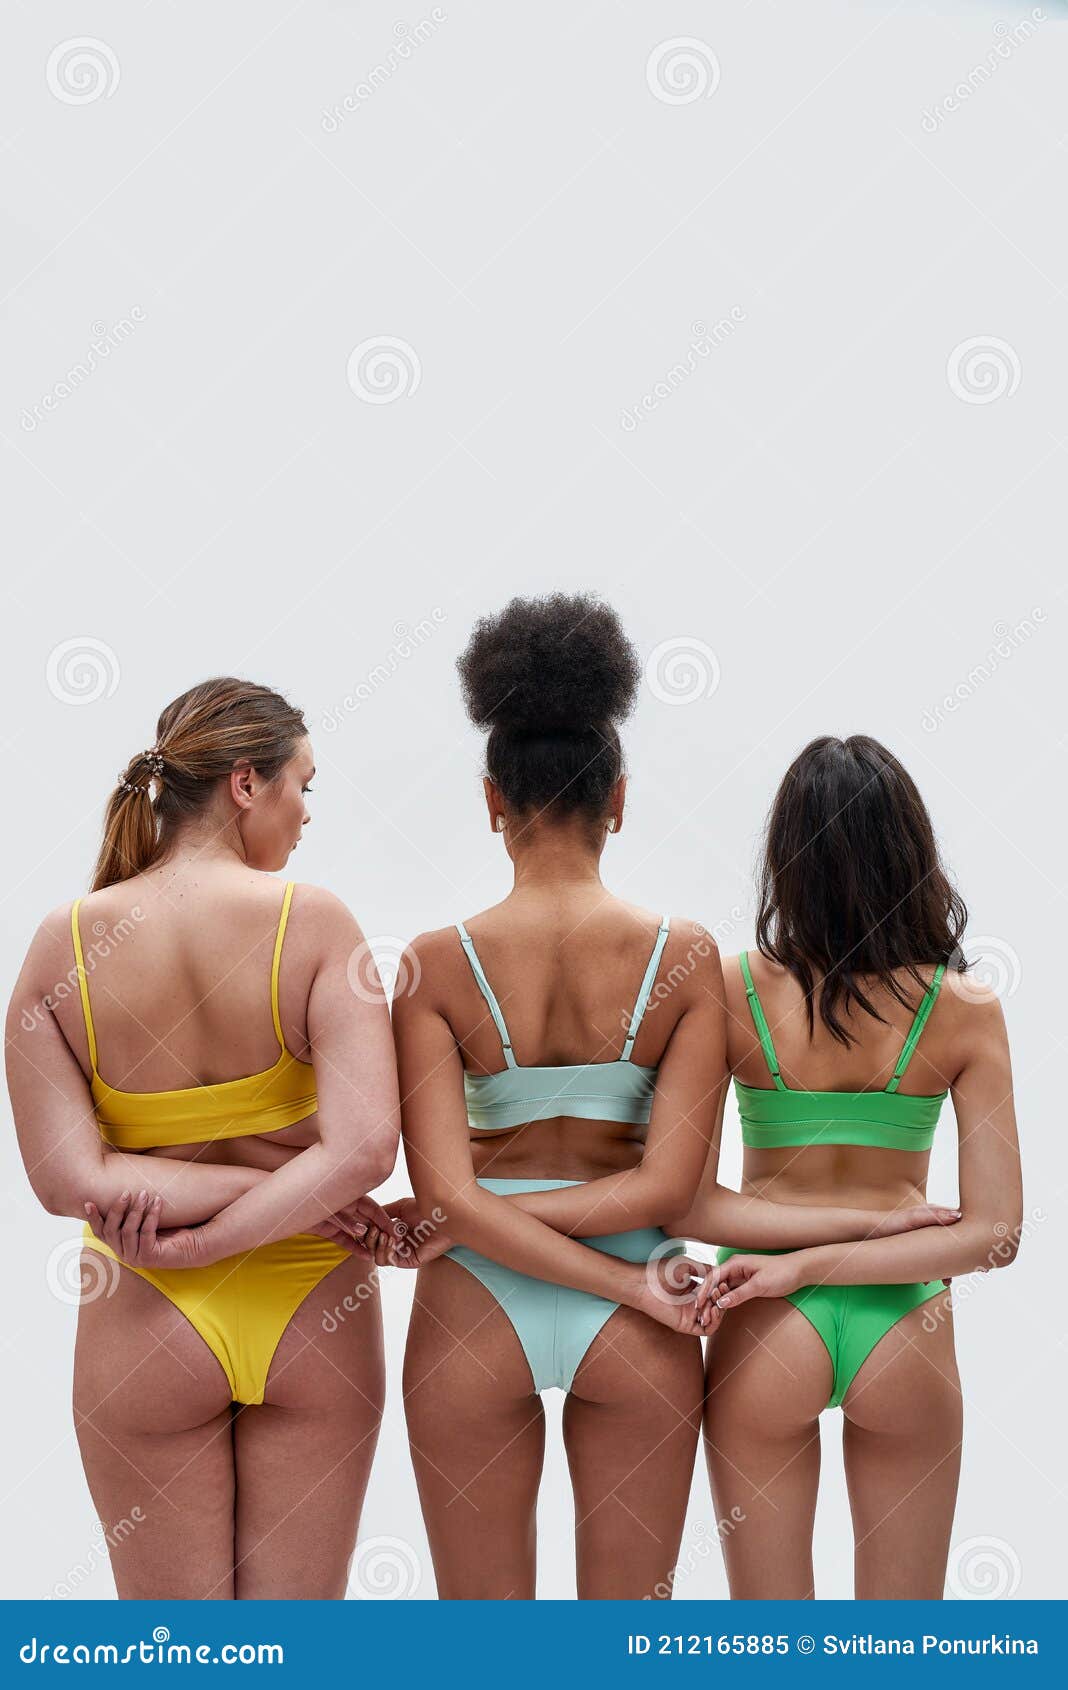 Rear View of Three Female Models with Different Body Types in Colorful  Underwear Holding Hands, Supporting Each Other Editorial Image - Image of  confidence, colorful: 212165885